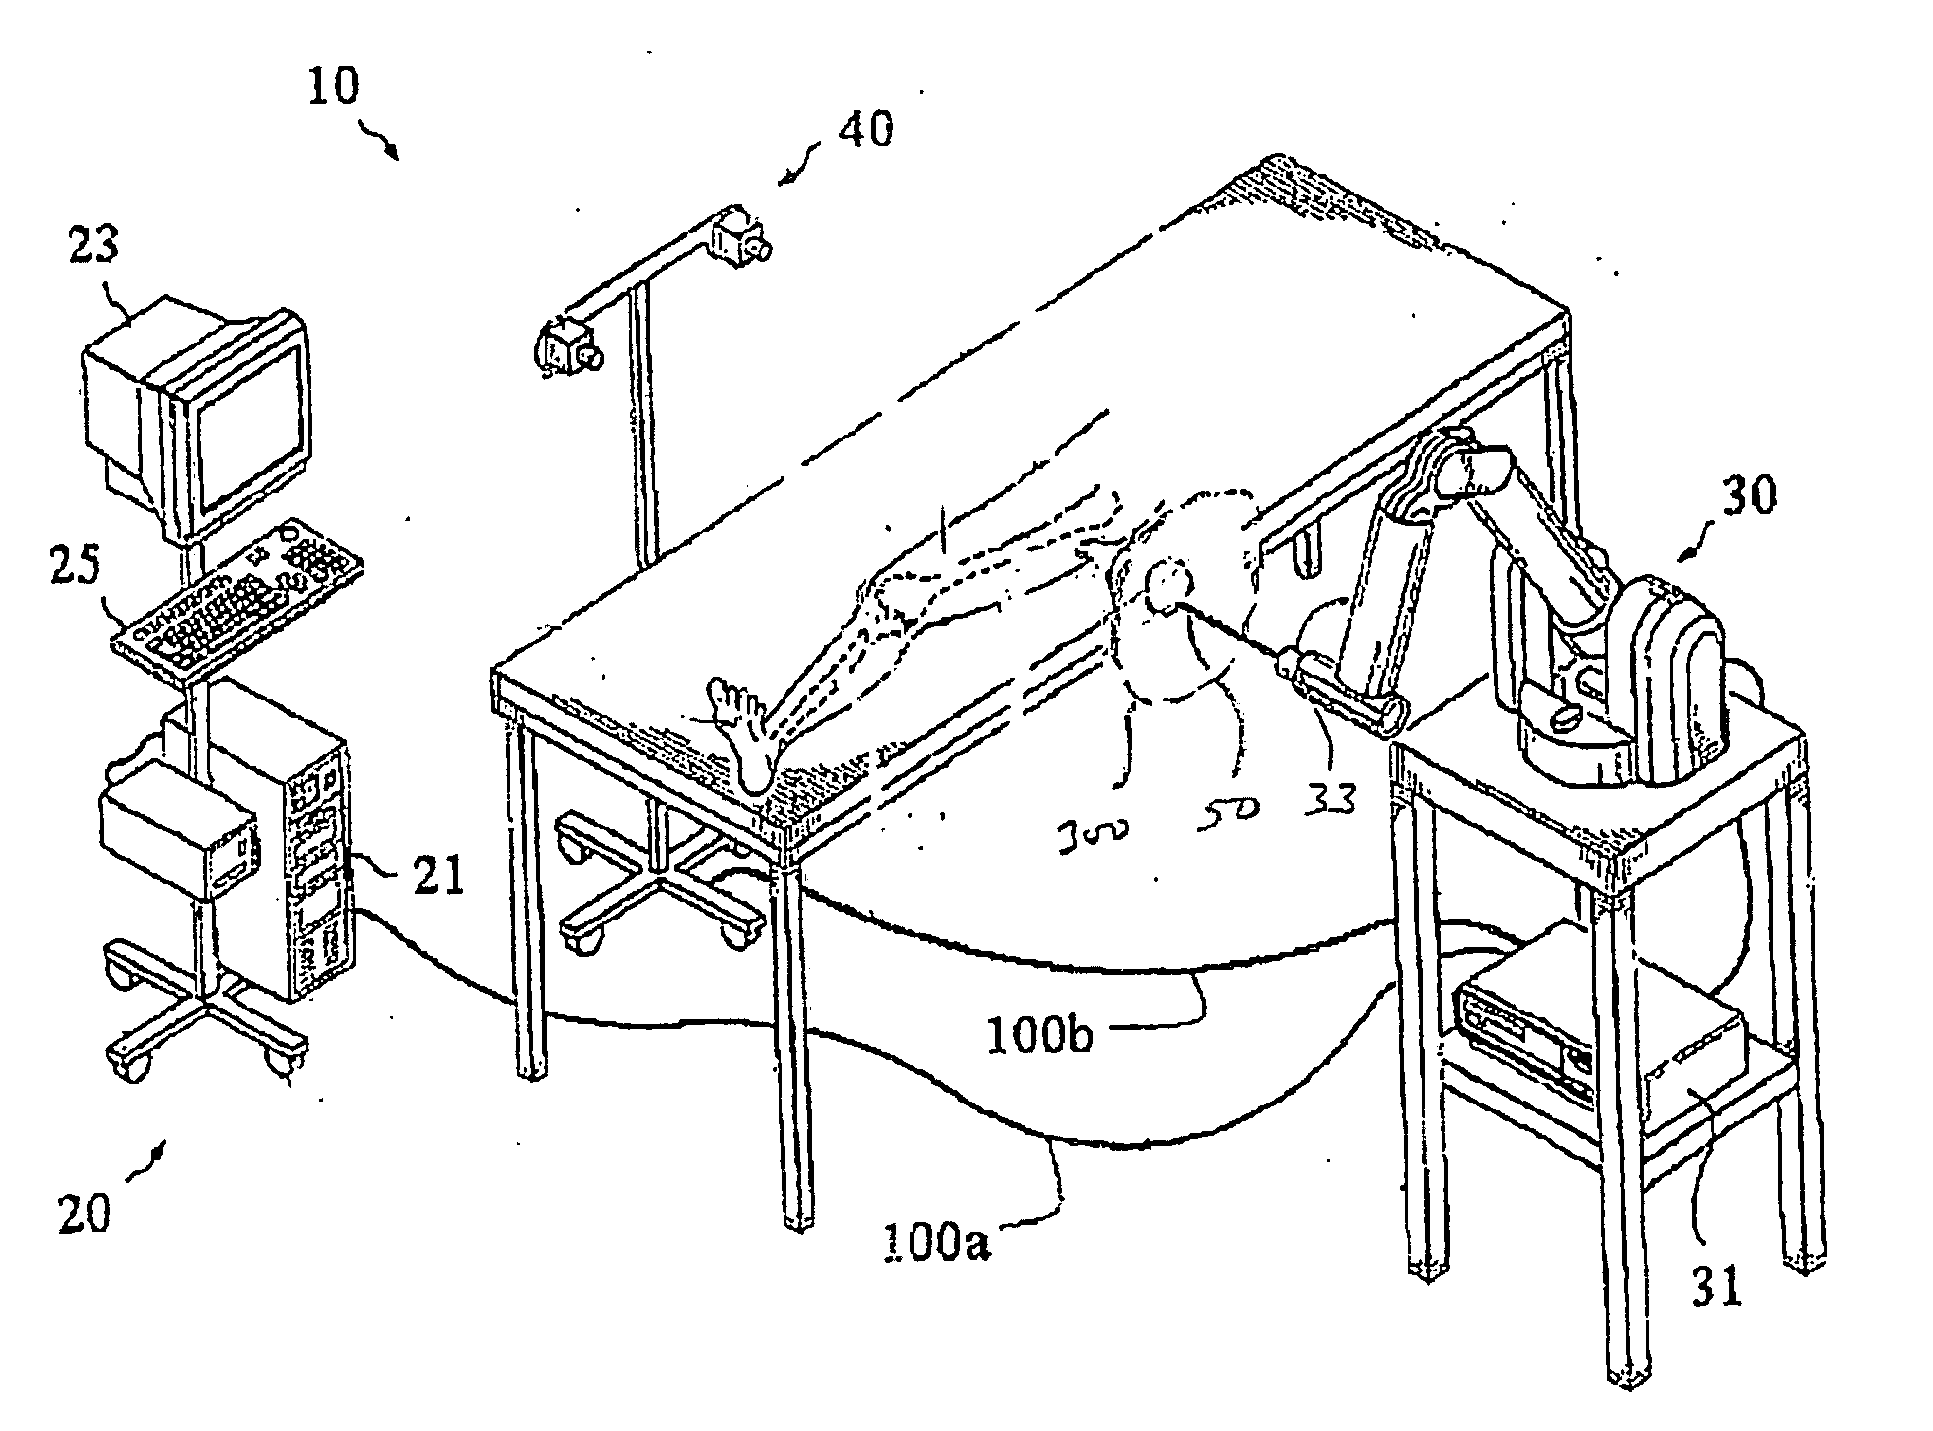 Apparatus and method for haptic rendering